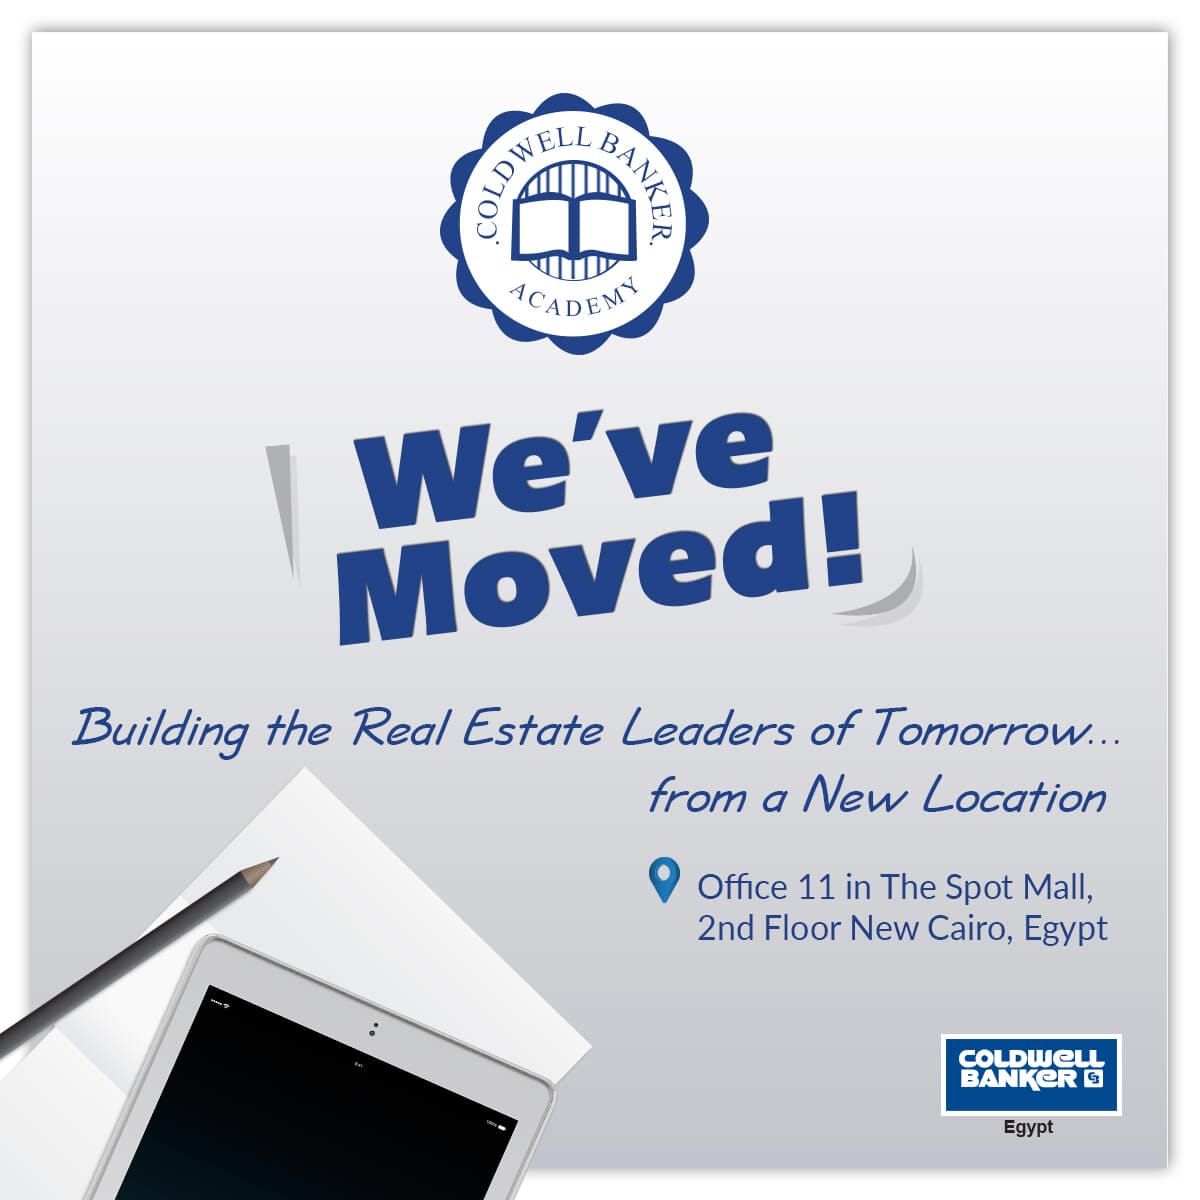 Coldwell Banker Egypt Training Academy just moved to a new location!